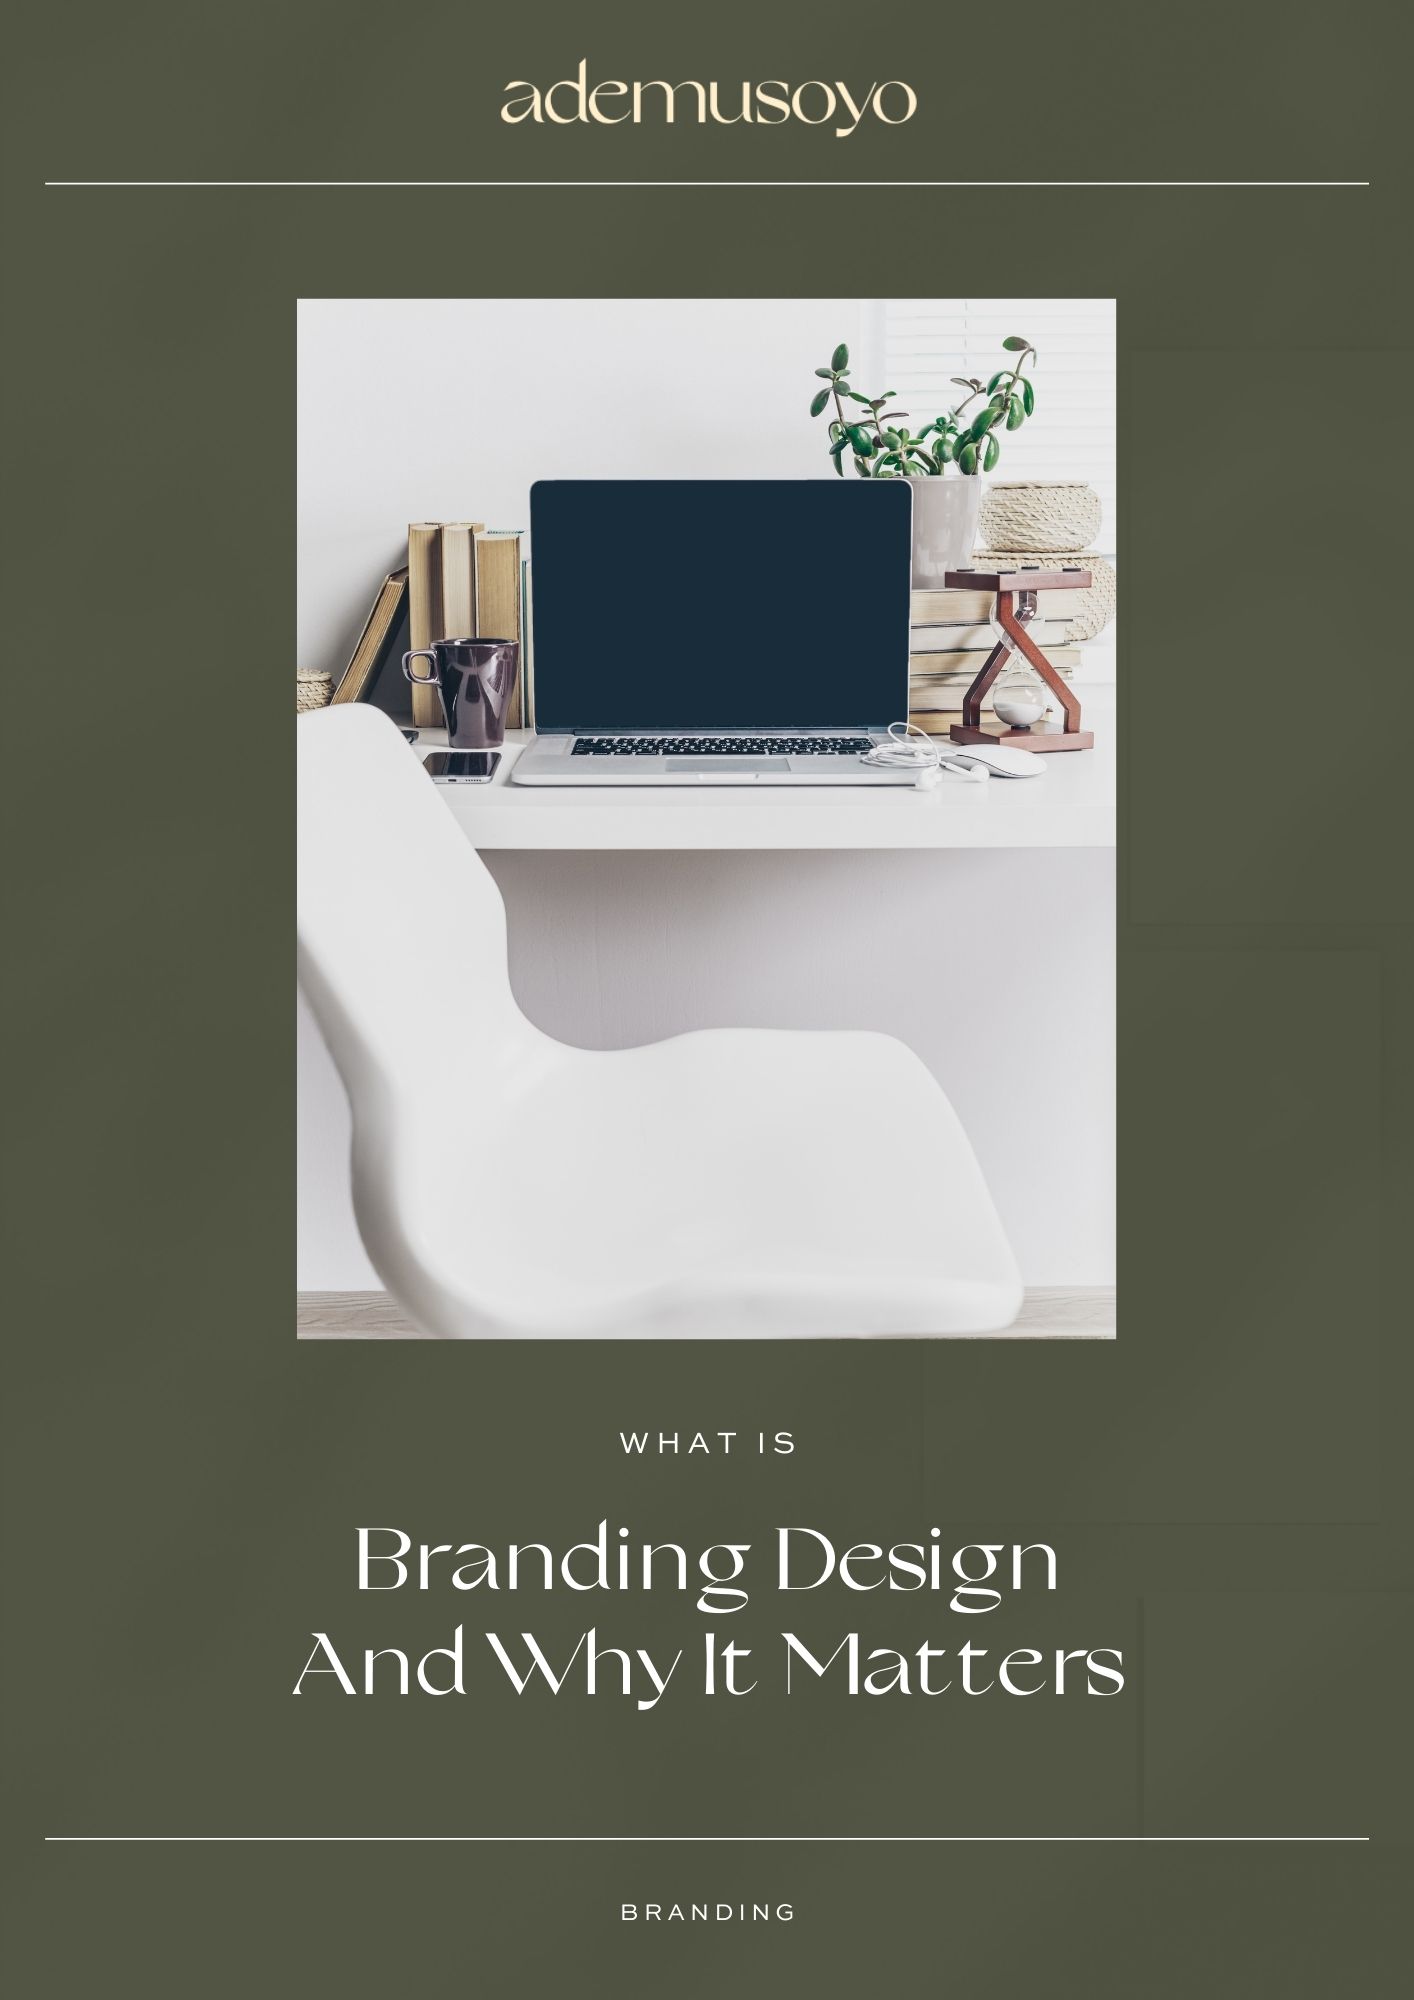 What is Branding Design And Why It Matters